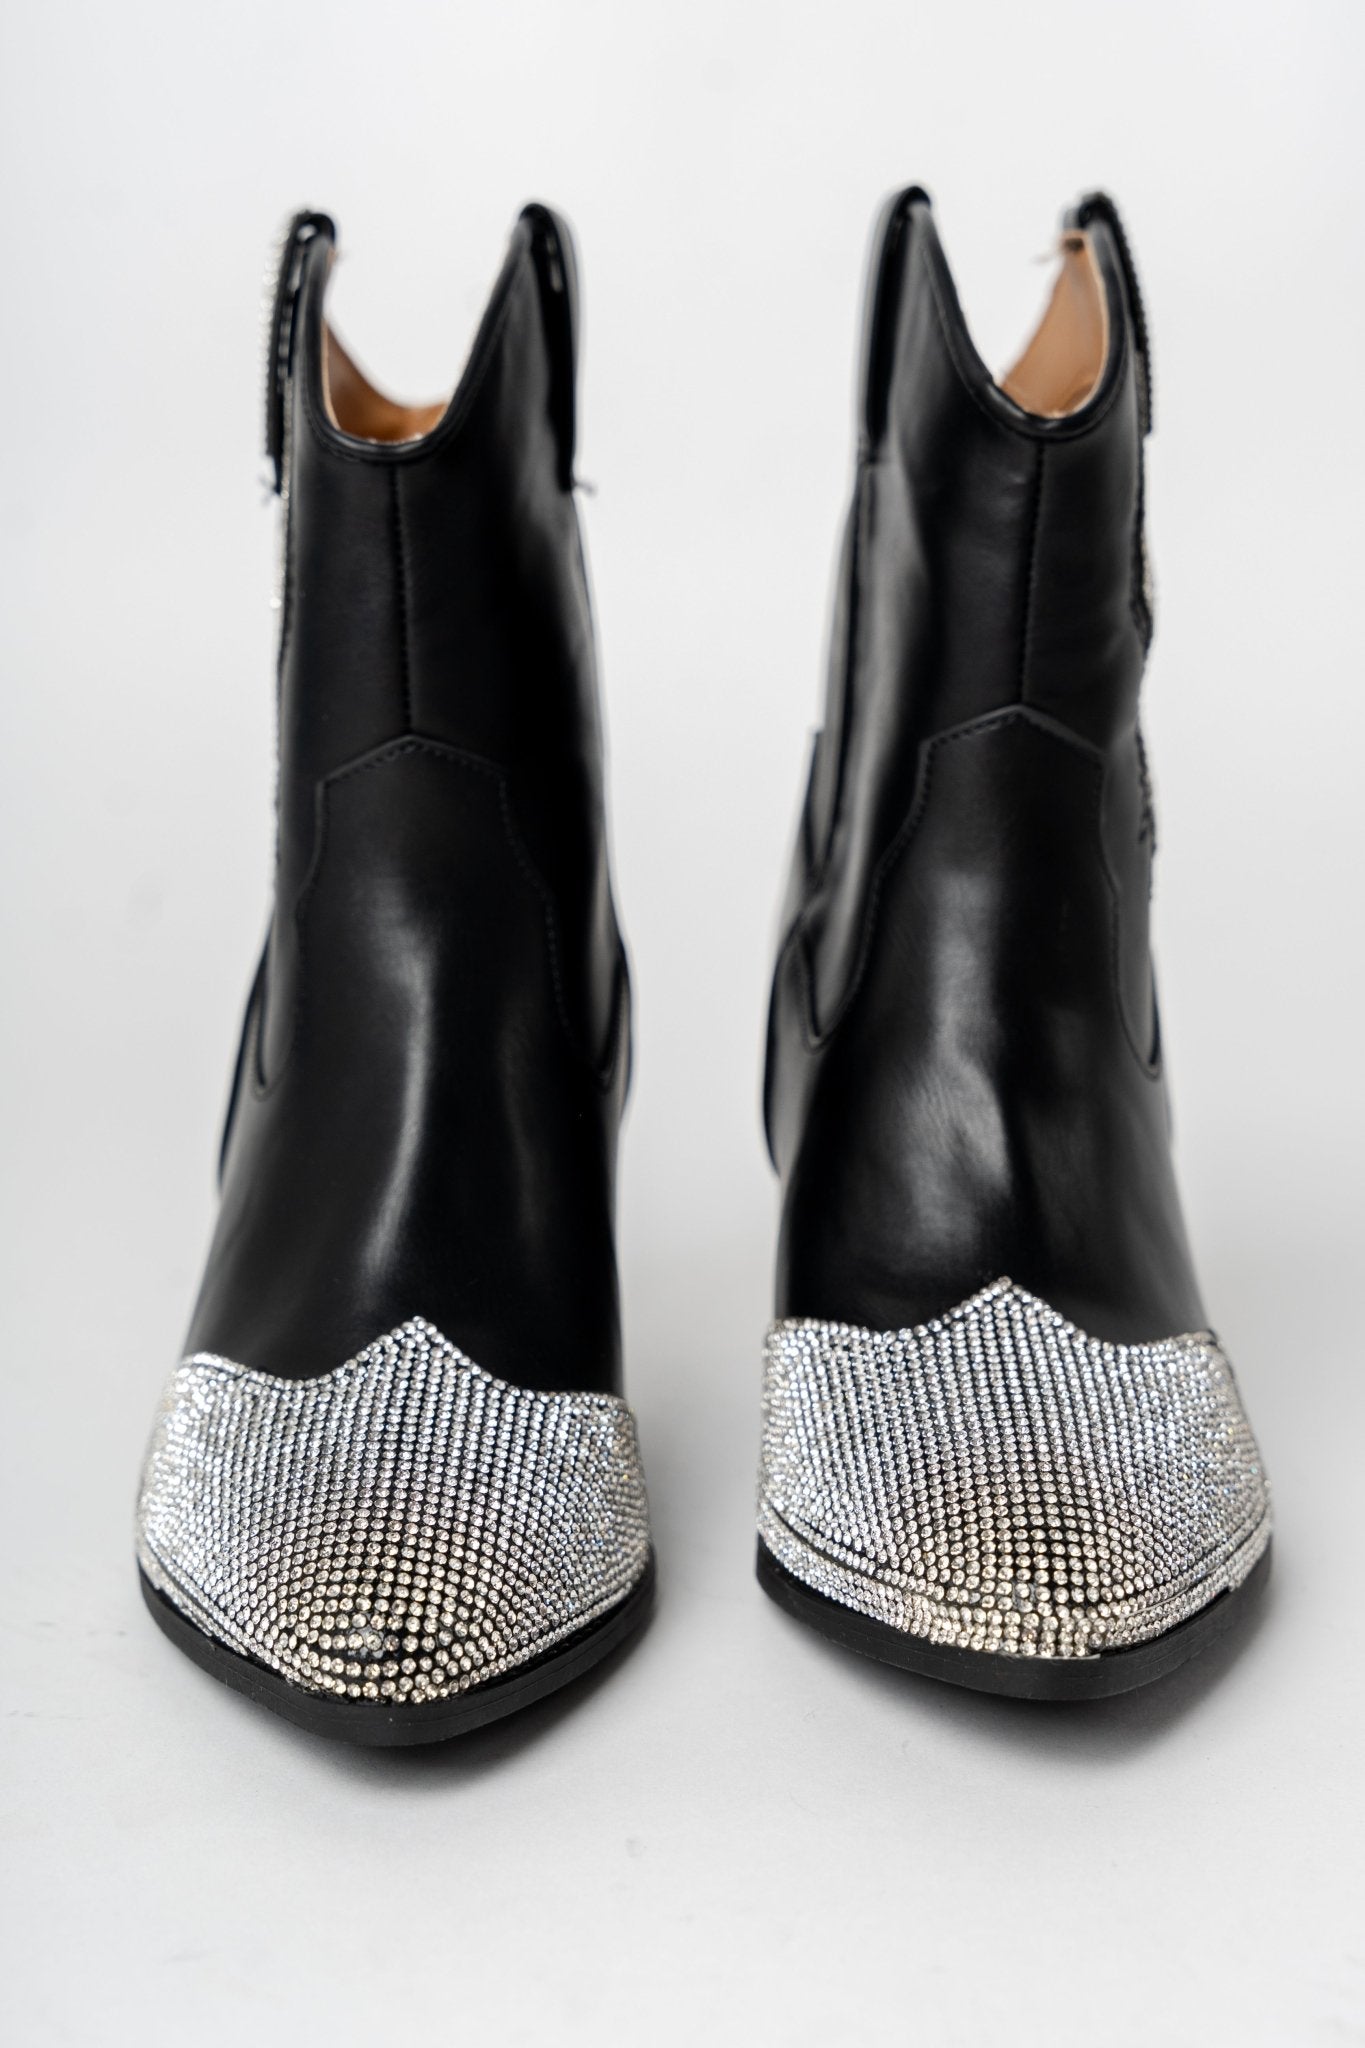 Zane embellished western bootie black - Trendy shoes - Fashion Shoes at Lush Fashion Lounge Boutique in Oklahoma City